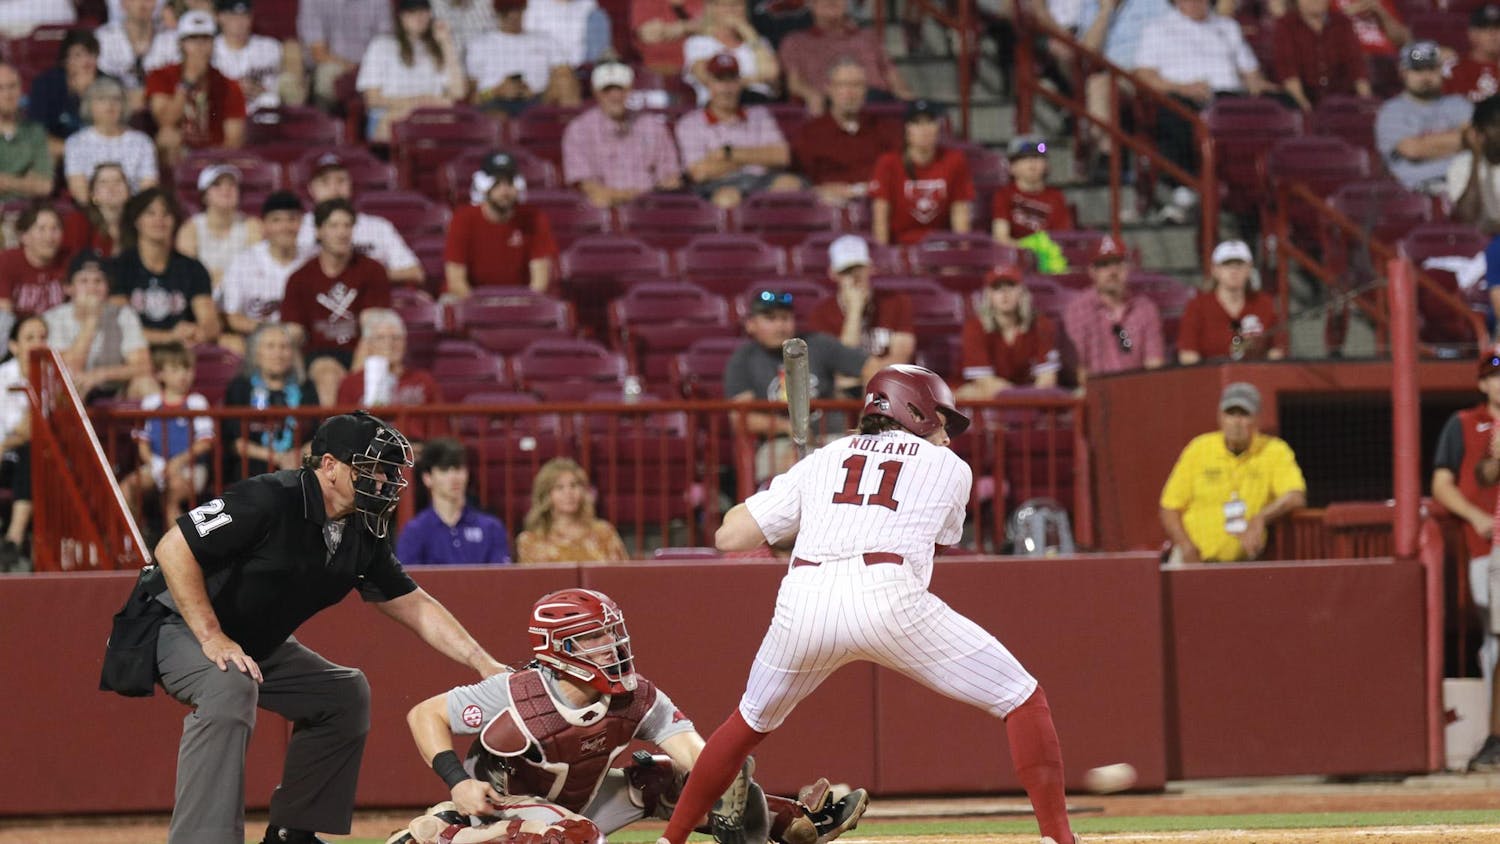 Fifth-year infielder Parker Noland takes a ball during his at-bat to even the score to 2-2 against the Razorbacks on April 19, 2024, at Founders Park. Noland ended his 24-game reached-base streak during the matchup.